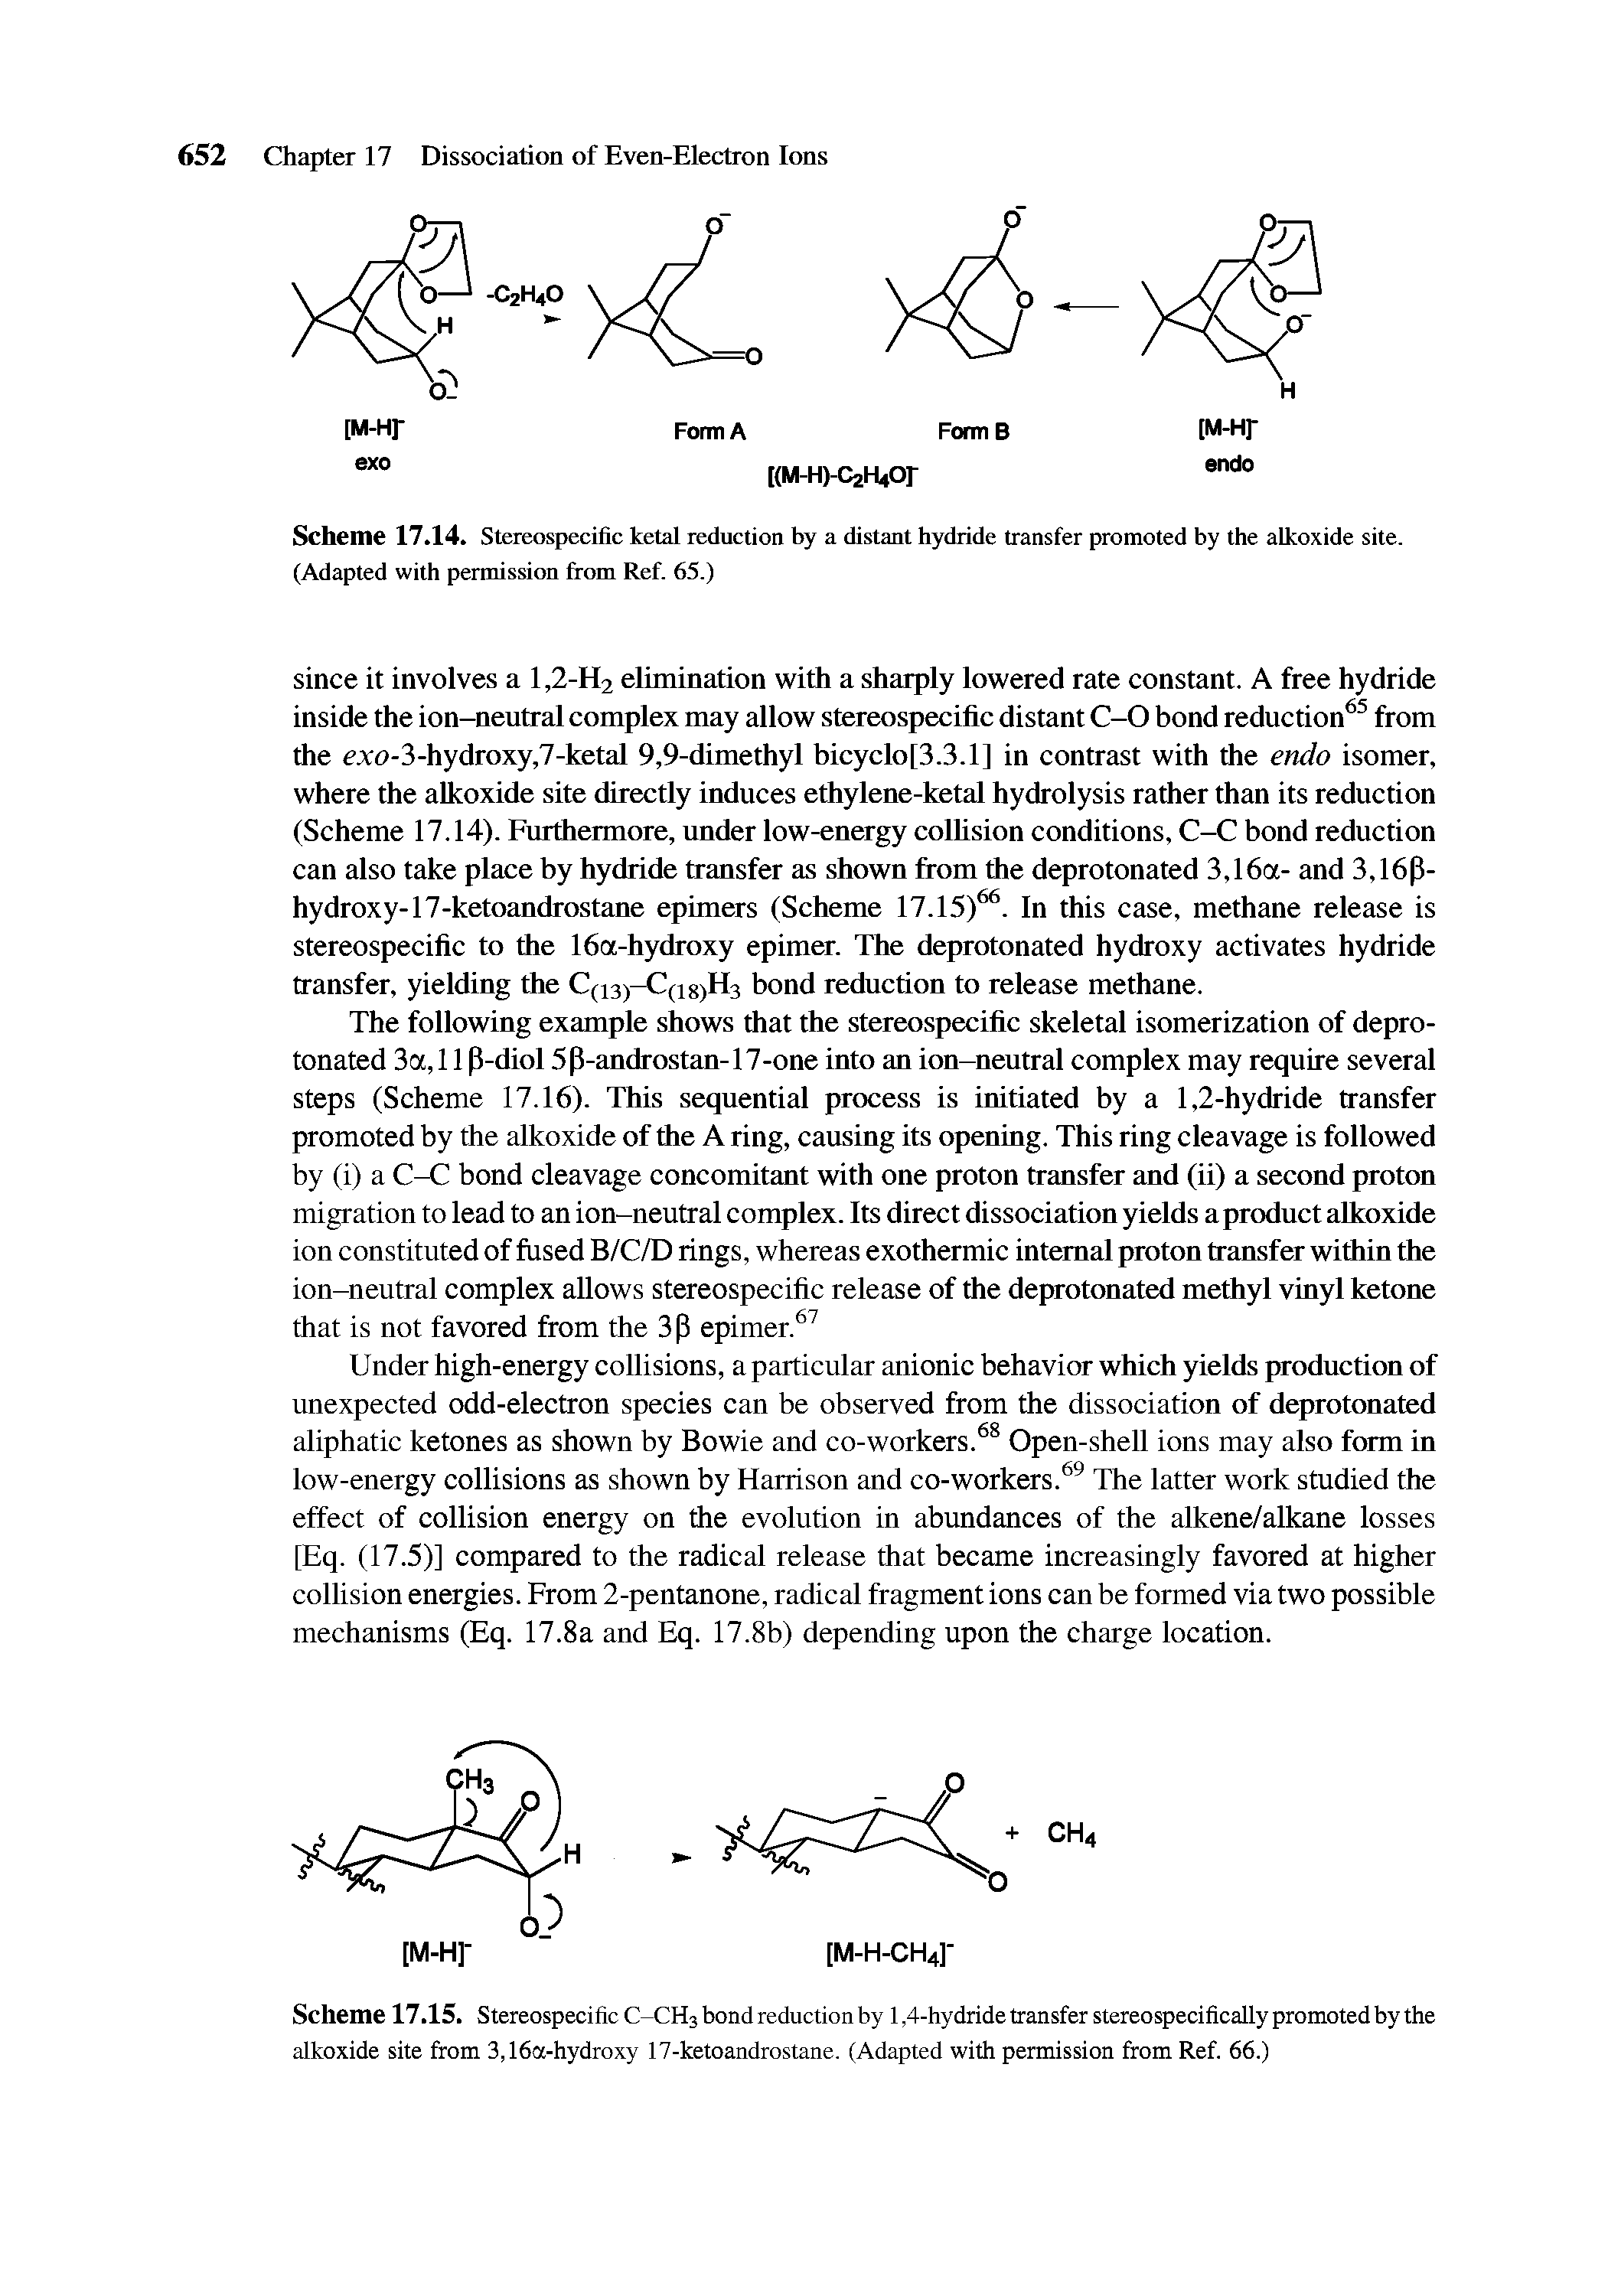 Scheme 17.14. Stereospecific ketal reduction by a distant hydride transfer promoted by the alkoxide site. (Adapted with permission from Ref. 65.)...